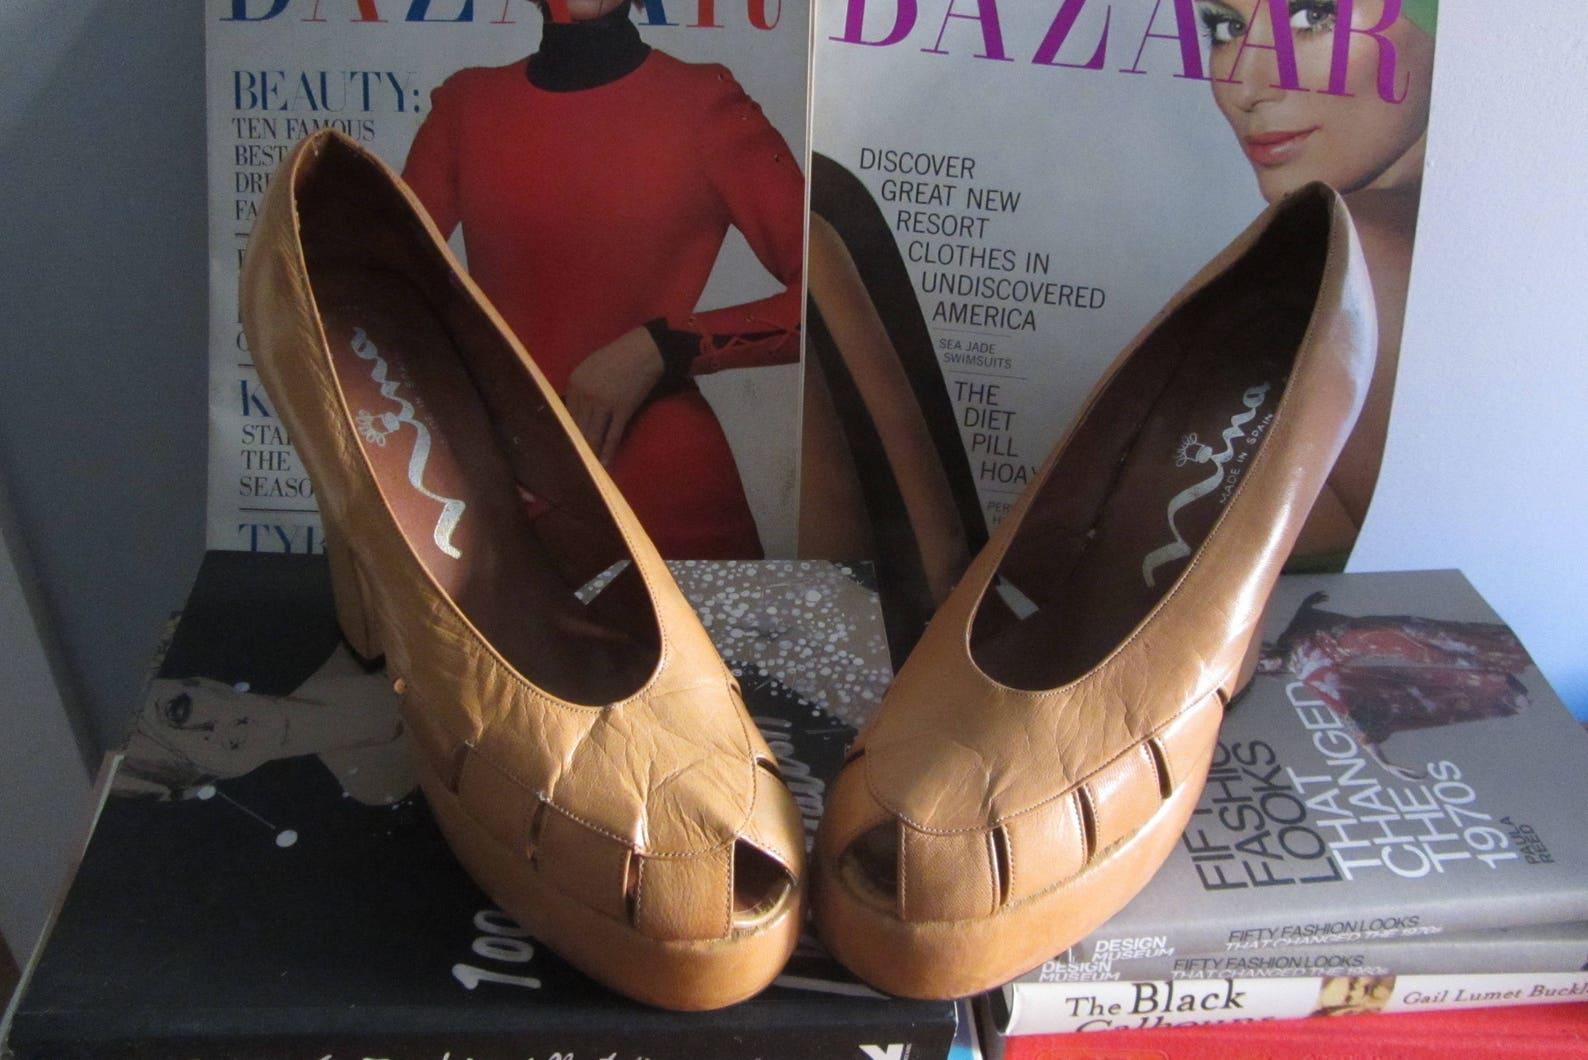 rare & collectible vintage platform pumps
beautiful & supple camel beige leather
peep toe
cut out vamp
sky high heels
made in Spain

🏷 These shoes are a spectacular piece of 70s does 40s fashion history!

Circa 1970s
Nina
Camel Beige
Good